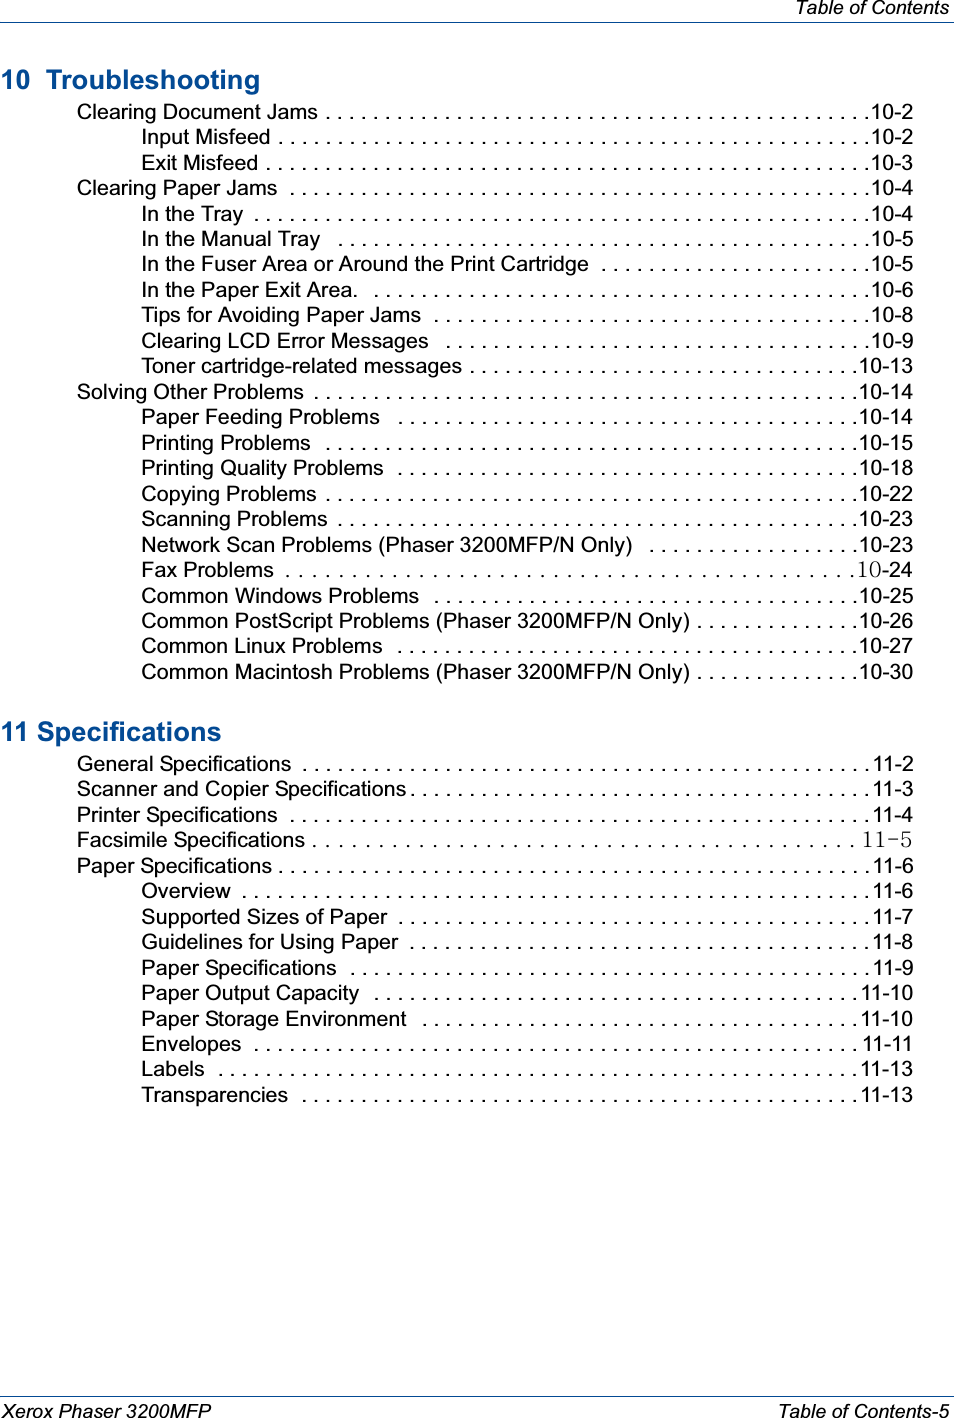 Table of ContentsXerox Phaser 3200MFP Table of Contents-510  Troubleshooting Clearing Document Jams . . . . . . . . . . . . . . . . . . . . . . . . . . . . . . . . . . . . . . . . . . . . . .10-2Input Misfeed . . . . . . . . . . . . . . . . . . . . . . . . . . . . . . . . . . . . . . . . . . . . . . . . . .10-2Exit Misfeed . . . . . . . . . . . . . . . . . . . . . . . . . . . . . . . . . . . . . . . . . . . . . . . . . . .10-3 Clearing Paper Jams  . . . . . . . . . . . . . . . . . . . . . . . . . . . . . . . . . . . . . . . . . . . . . . . . .10-4In the Tray  . . . . . . . . . . . . . . . . . . . . . . . . . . . . . . . . . . . . . . . . . . . . . . . . . . . .10-4In the Manual Tray   . . . . . . . . . . . . . . . . . . . . . . . . . . . . . . . . . . . . . . . . . . . . .10-5In the Fuser Area or Around the Print Cartridge  . . . . . . . . . . . . . . . . . . . . . . .10-5In the Paper Exit Area.   . . . . . . . . . . . . . . . . . . . . . . . . . . . . . . . . . . . . . . . . . .10-6Tips for Avoiding Paper Jams  . . . . . . . . . . . . . . . . . . . . . . . . . . . . . . . . . . . . .10-8Clearing LCD Error Messages   . . . . . . . . . . . . . . . . . . . . . . . . . . . . . . . . . . . .10-9Toner cartridge-related messages . . . . . . . . . . . . . . . . . . . . . . . . . . . . . . . . .10-13 Solving Other Problems  . . . . . . . . . . . . . . . . . . . . . . . . . . . . . . . . . . . . . . . . . . . . . .10-14Paper Feeding Problems   . . . . . . . . . . . . . . . . . . . . . . . . . . . . . . . . . . . . . . .10-14Printing Problems   . . . . . . . . . . . . . . . . . . . . . . . . . . . . . . . . . . . . . . . . . . . . .10-15Printing Quality Problems  . . . . . . . . . . . . . . . . . . . . . . . . . . . . . . . . . . . . . . .10-18Copying Problems . . . . . . . . . . . . . . . . . . . . . . . . . . . . . . . . . . . . . . . . . . . . .10-22Scanning Problems  . . . . . . . . . . . . . . . . . . . . . . . . . . . . . . . . . . . . . . . . . . . .10-23Network Scan Problems (Phaser 3200MFP/N Only)   . . . . . . . . . . . . . . . . . .10-23Fax ProblemsG UGUGUGUGUGUGUGUGUGUGUGUGUGUGUGUGUGUGUGUGUGUGUGUGUGUGUGUGUGUGUGUGUGUGUGUGUGUGUGUGUGUGUXW-24Common Windows Problems  . . . . . . . . . . . . . . . . . . . . . . . . . . . . . . . . . . . .10-25Common PostScript Problems (Phaser 3200MFP/N Only) . . . . . . . . . . . . . .10-26Common Linux Problems   . . . . . . . . . . . . . . . . . . . . . . . . . . . . . . . . . . . . . . .10-27Common Macintosh Problems (Phaser 3200MFP/N Only) . . . . . . . . . . . . . .10-3011 Specifications General Specifications  . . . . . . . . . . . . . . . . . . . . . . . . . . . . . . . . . . . . . . . . . . . . . . . .11-2 Scanner and Copier Specifications . . . . . . . . . . . . . . . . . . . . . . . . . . . . . . . . . . . . . . .11-3 Printer Specifications  . . . . . . . . . . . . . . . . . . . . . . . . . . . . . . . . . . . . . . . . . . . . . . . . .11-4 Facsimile Specifications UGUGUGUGUGUGUGUGUGUGUGUGUGUGUGUGUGUGUGUGUGUGUGUGUGUGUGUGUGUGUGUGUGUGUGUGUGUGUGUGU XXT\ Paper Specifications . . . . . . . . . . . . . . . . . . . . . . . . . . . . . . . . . . . . . . . . . . . . . . . . . .11-6Overview  . . . . . . . . . . . . . . . . . . . . . . . . . . . . . . . . . . . . . . . . . . . . . . . . . . . . . 11-6Supported Sizes of Paper  . . . . . . . . . . . . . . . . . . . . . . . . . . . . . . . . . . . . . . . .11-7Guidelines for Using Paper  . . . . . . . . . . . . . . . . . . . . . . . . . . . . . . . . . . . . . . . 11-8Paper Specifications  . . . . . . . . . . . . . . . . . . . . . . . . . . . . . . . . . . . . . . . . . . . .11-9Paper Output Capacity   . . . . . . . . . . . . . . . . . . . . . . . . . . . . . . . . . . . . . . . . .11-10Paper Storage Environment   . . . . . . . . . . . . . . . . . . . . . . . . . . . . . . . . . . . . .11-10Envelopes  . . . . . . . . . . . . . . . . . . . . . . . . . . . . . . . . . . . . . . . . . . . . . . . . . . . 11-11Labels  . . . . . . . . . . . . . . . . . . . . . . . . . . . . . . . . . . . . . . . . . . . . . . . . . . . . . .11-13Transparencies  . . . . . . . . . . . . . . . . . . . . . . . . . . . . . . . . . . . . . . . . . . . . . . .11-13